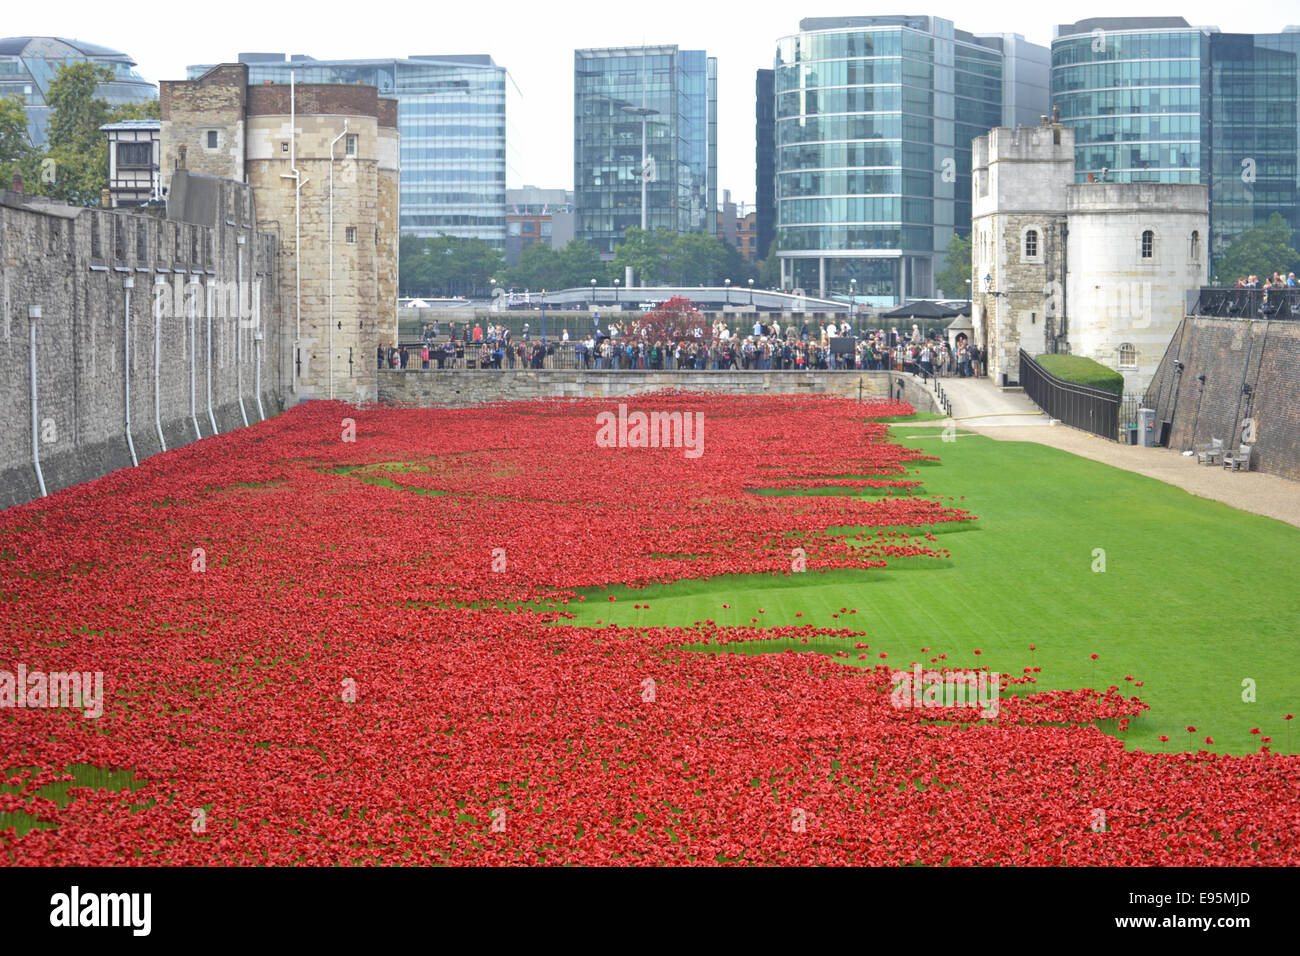 Ceramic poppies in the moat surrounding the Tower of London, London, UK. Stock Photo